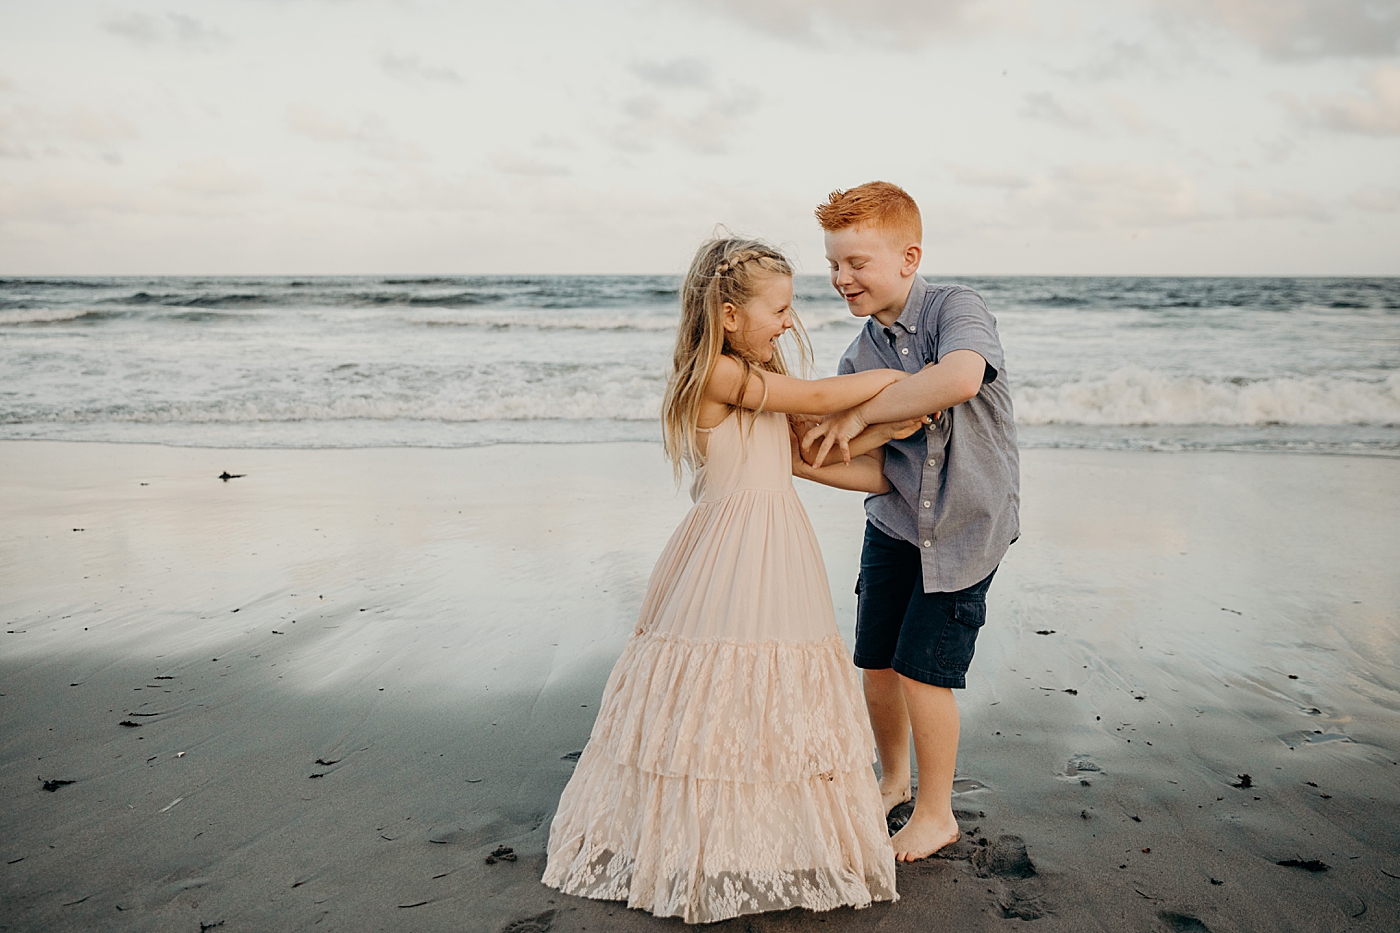 Kids playing with waves coming in on the beach Ocean Ridge Hammock Park Family Photography by South Florida Family Photographer Maggie Alvarez Photography